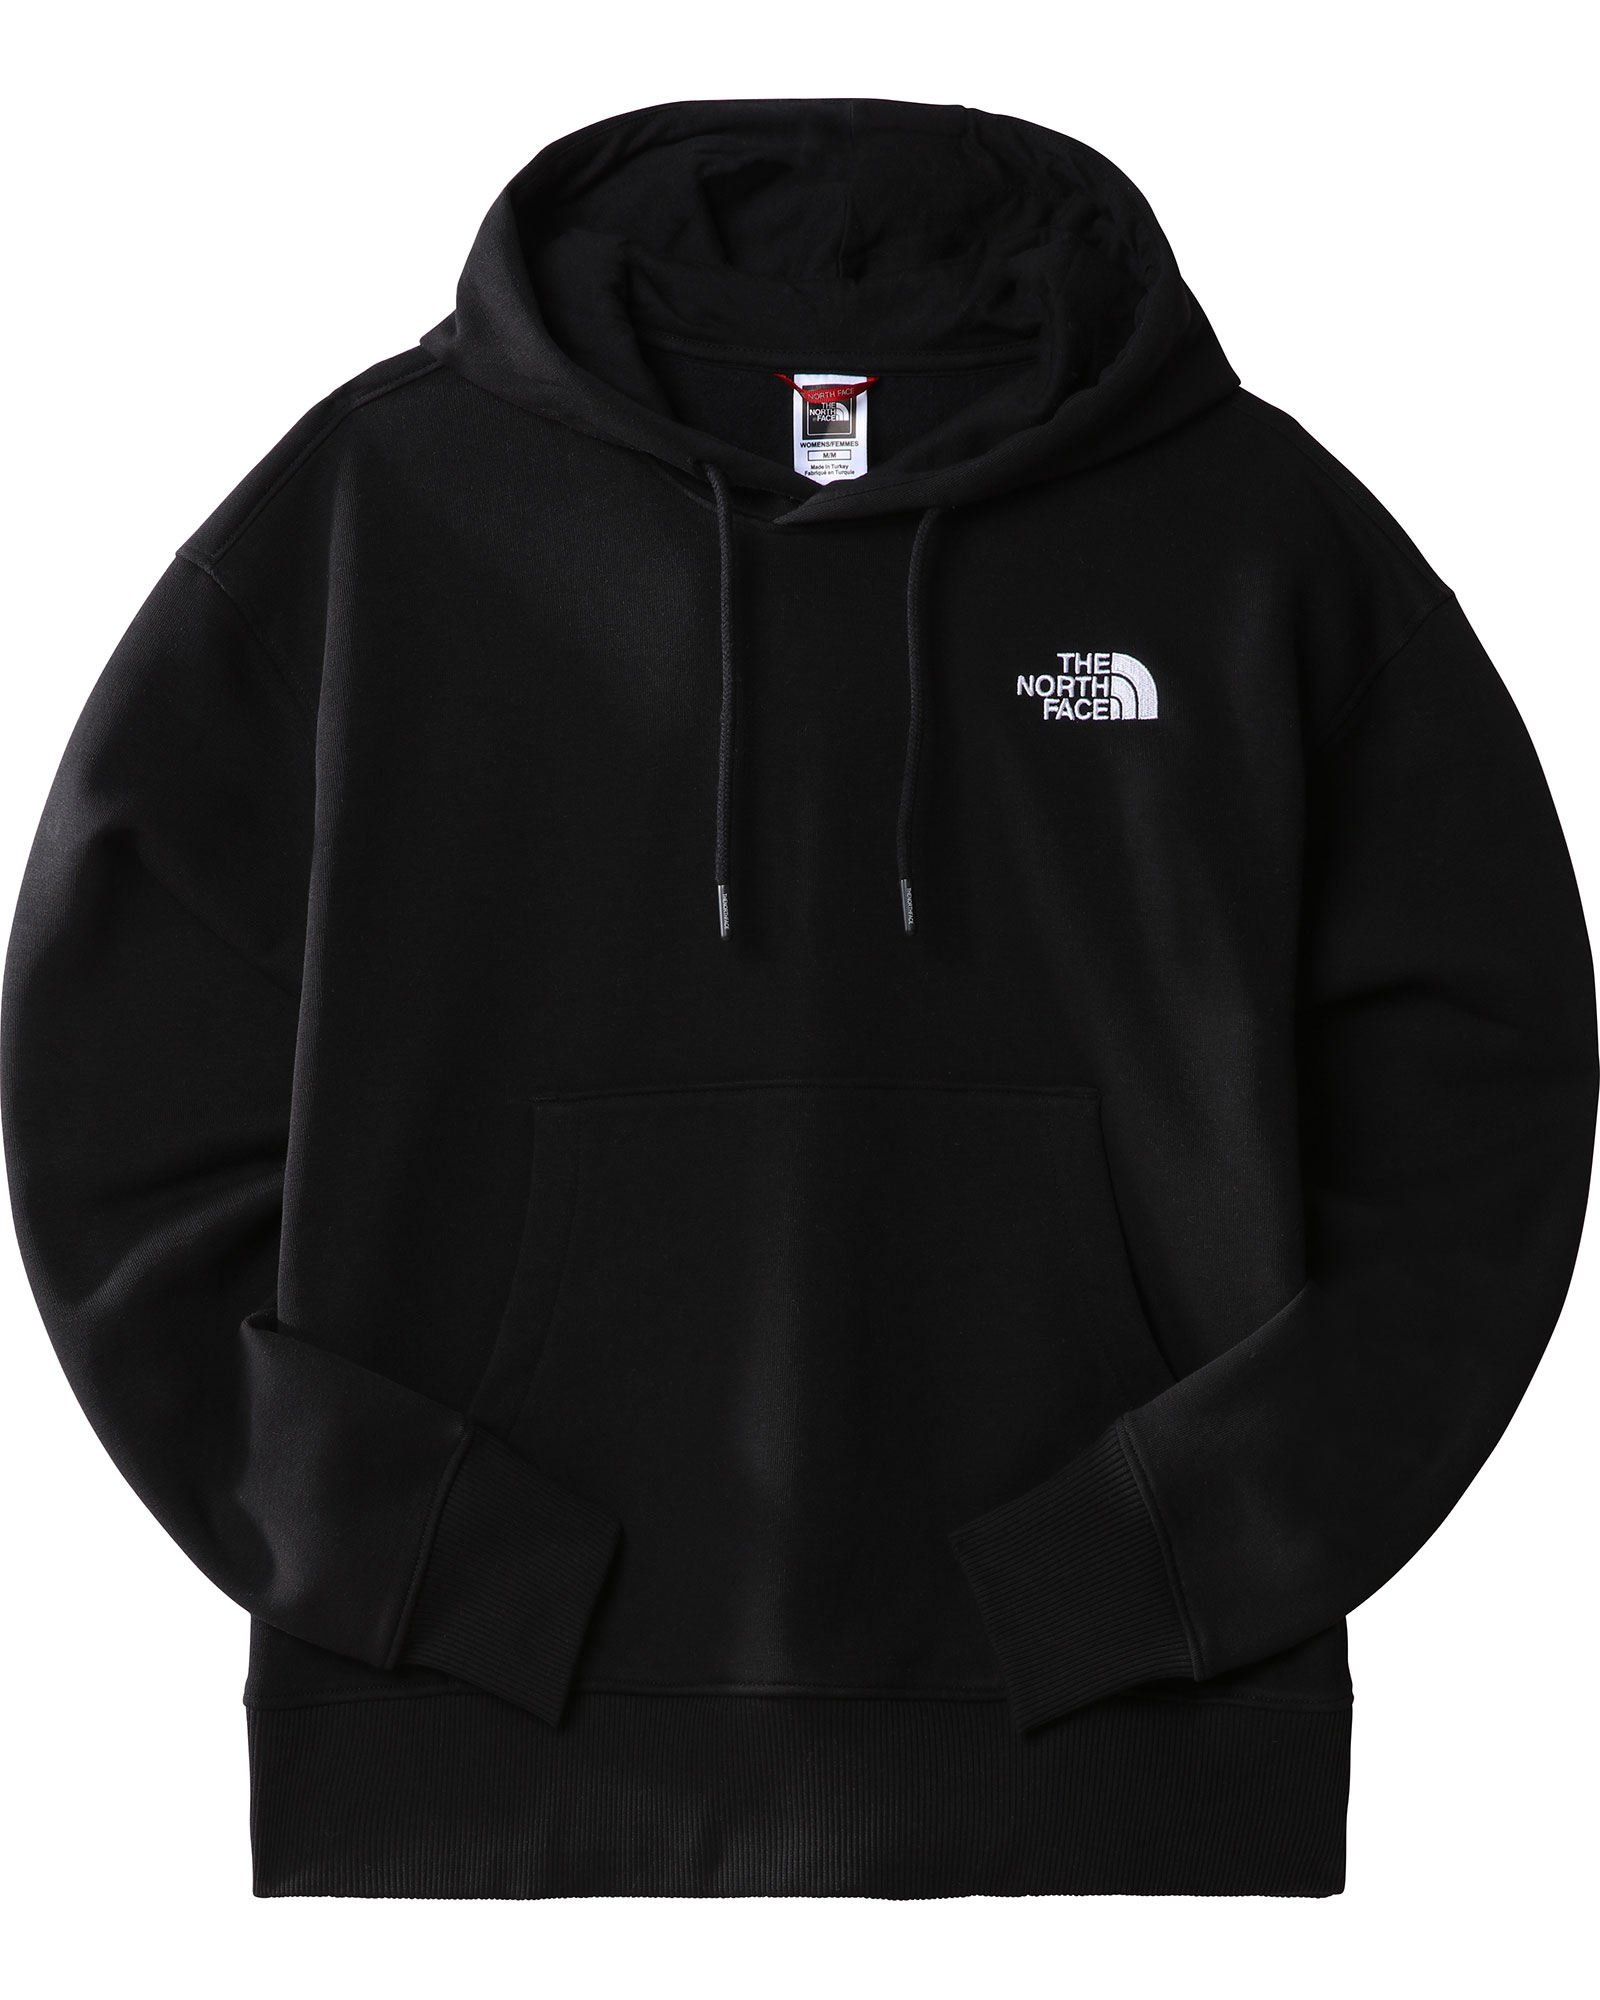 The North Face Women’s Essential Hoodie - TNF Black M